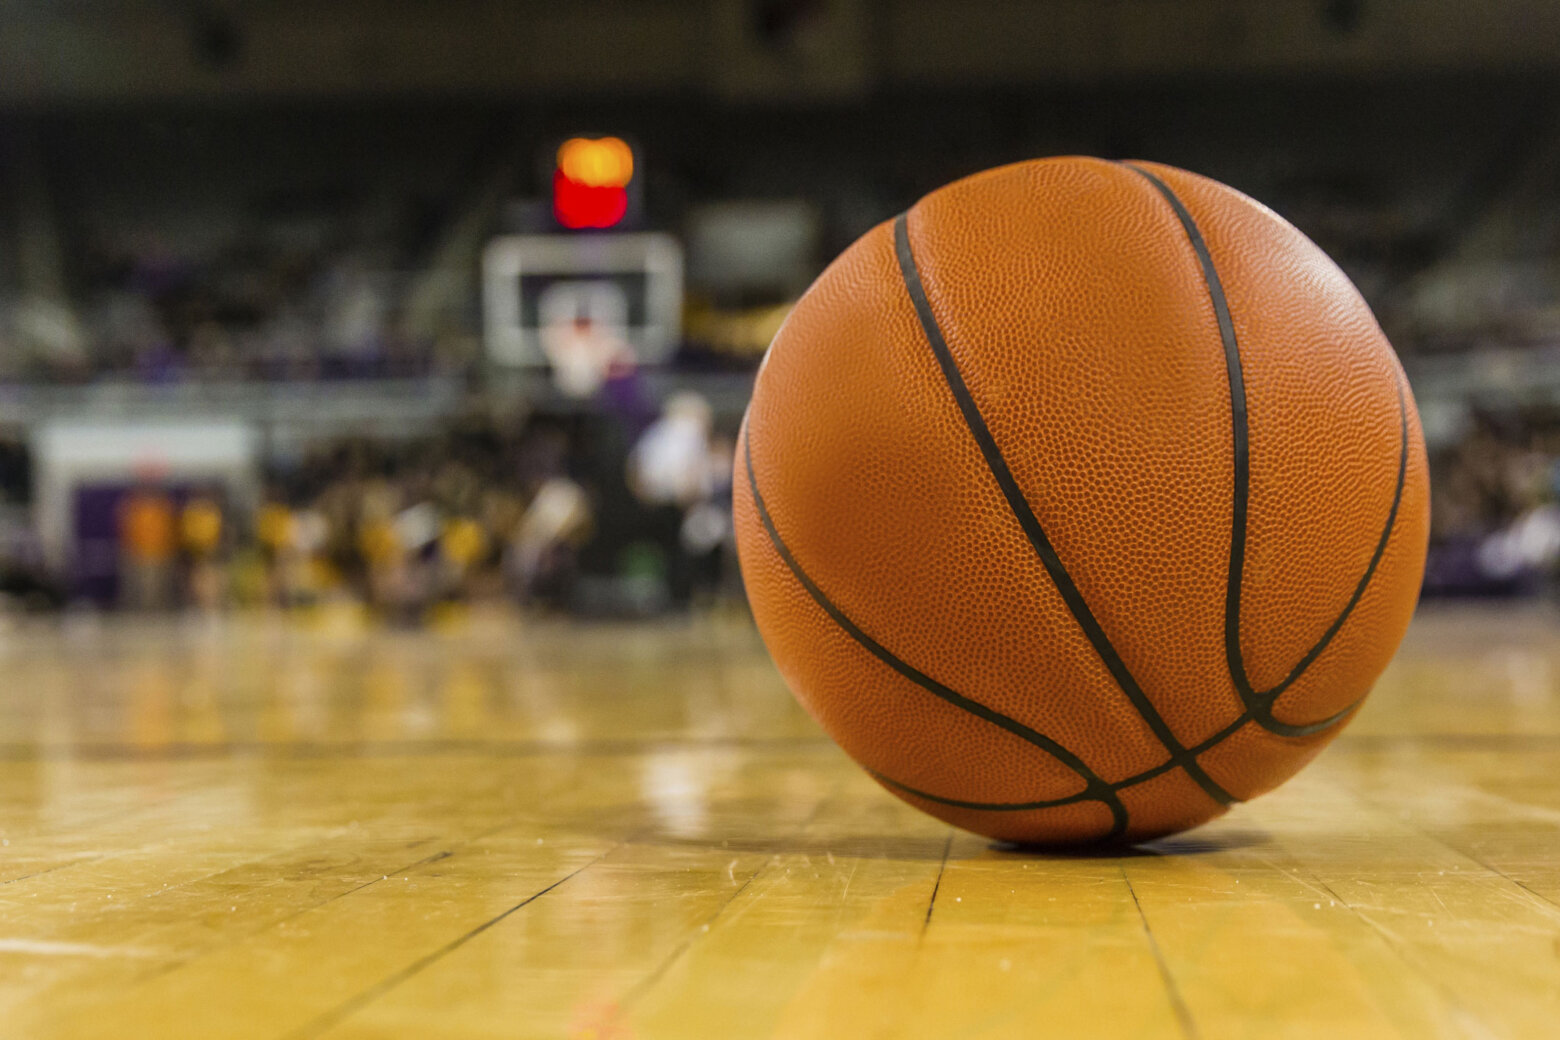 Virginia youth basketball team disqualified for having girl on team